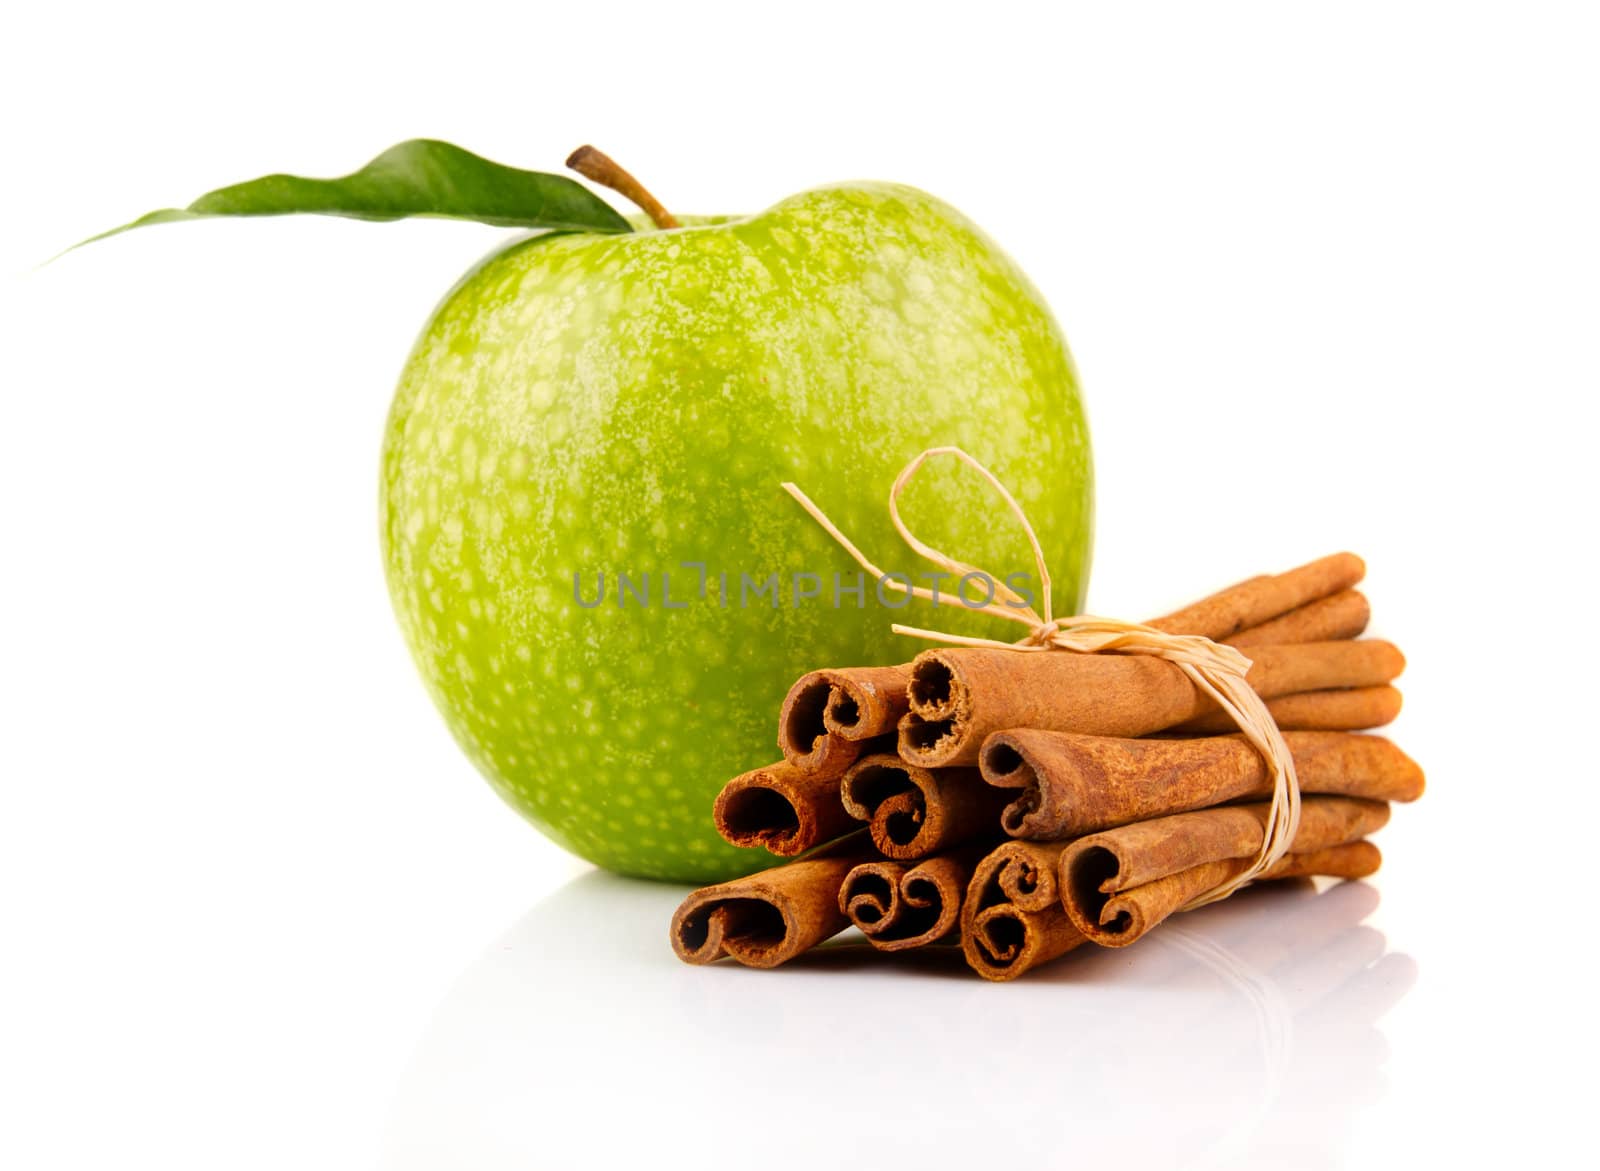 Ripe green apple with cinnamon sticks isolated on white background 